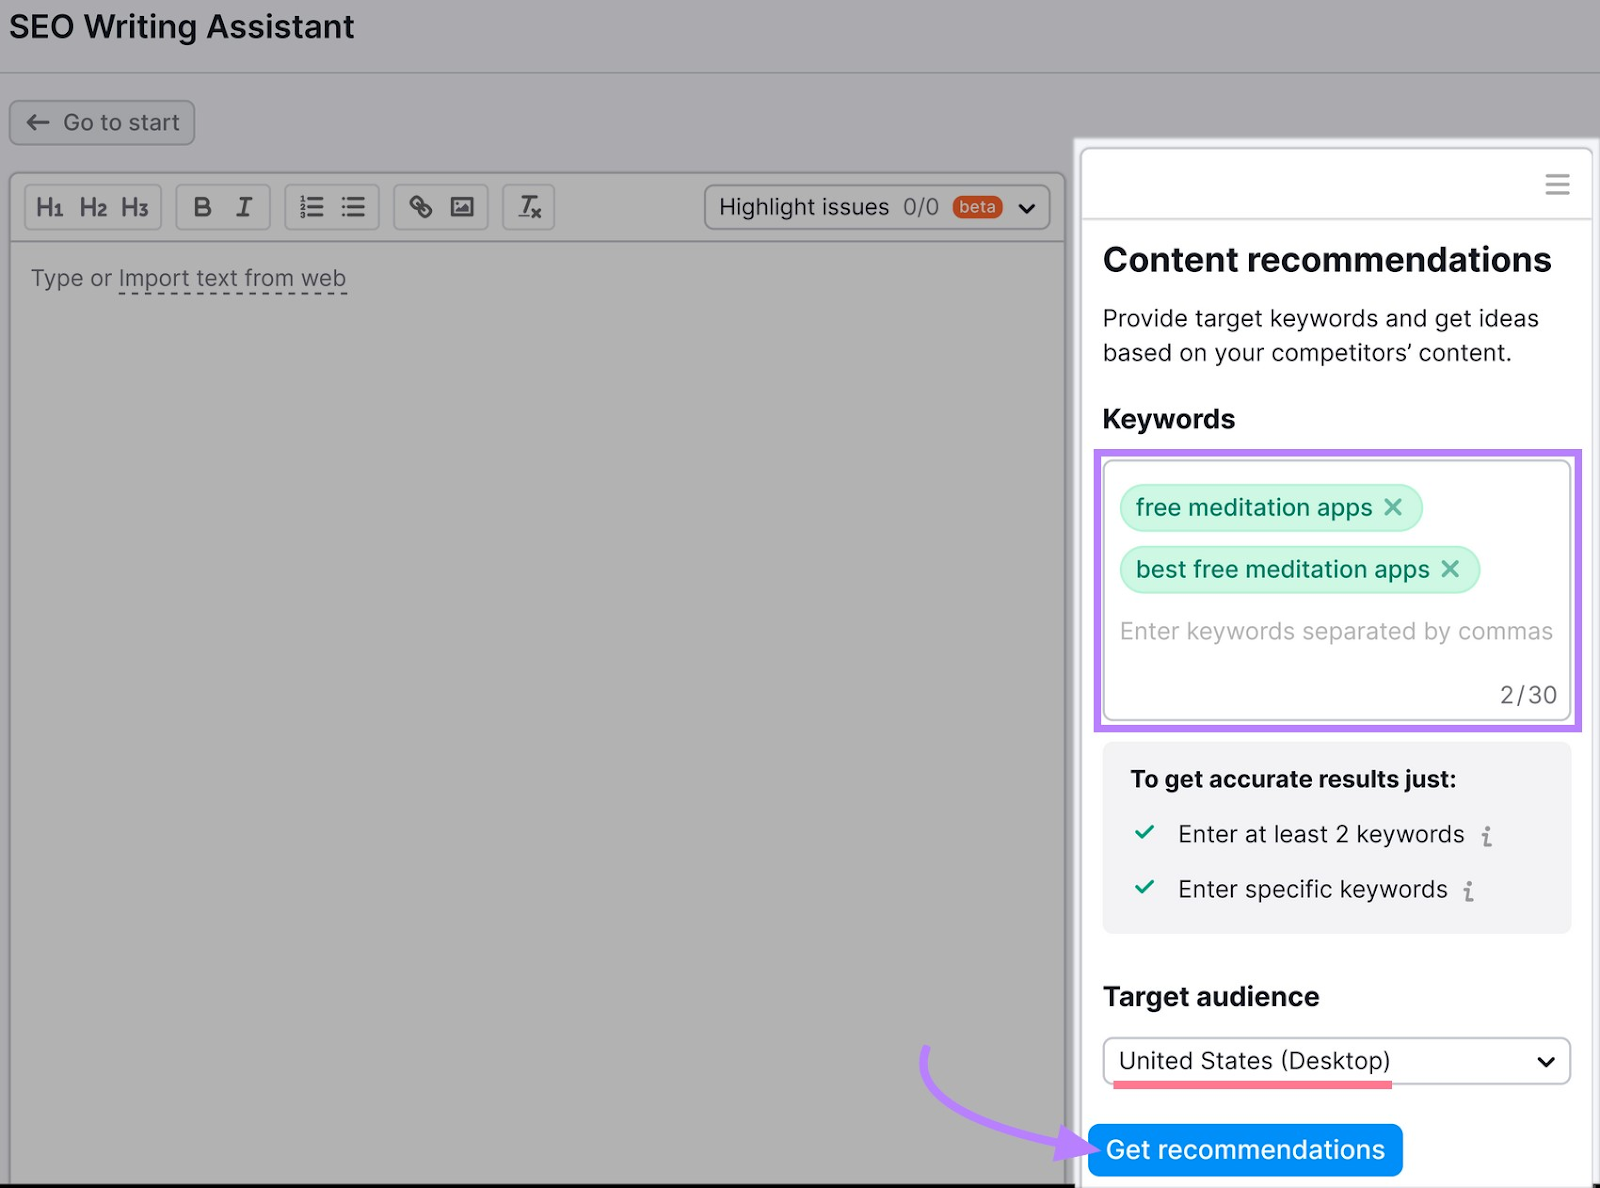 Setting up "Content recommendations" window in SEO Writing Assistant